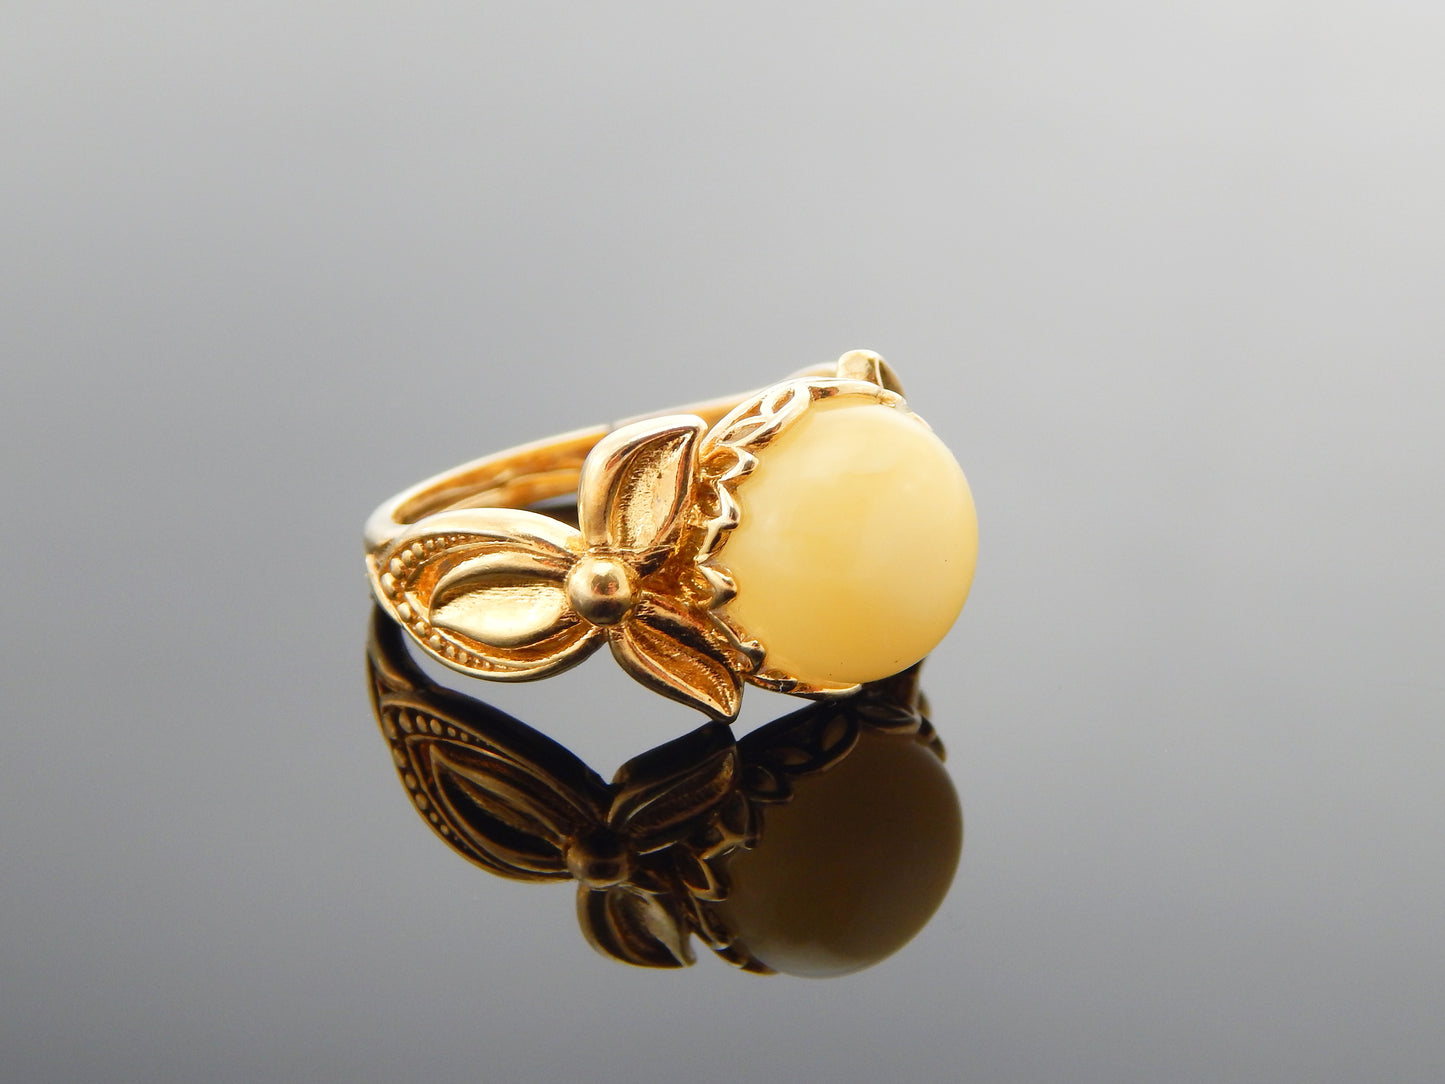 Natural Baltic Butterscotch Amber Royal Flower Adjustable Ring in 14k Gold Plated s925